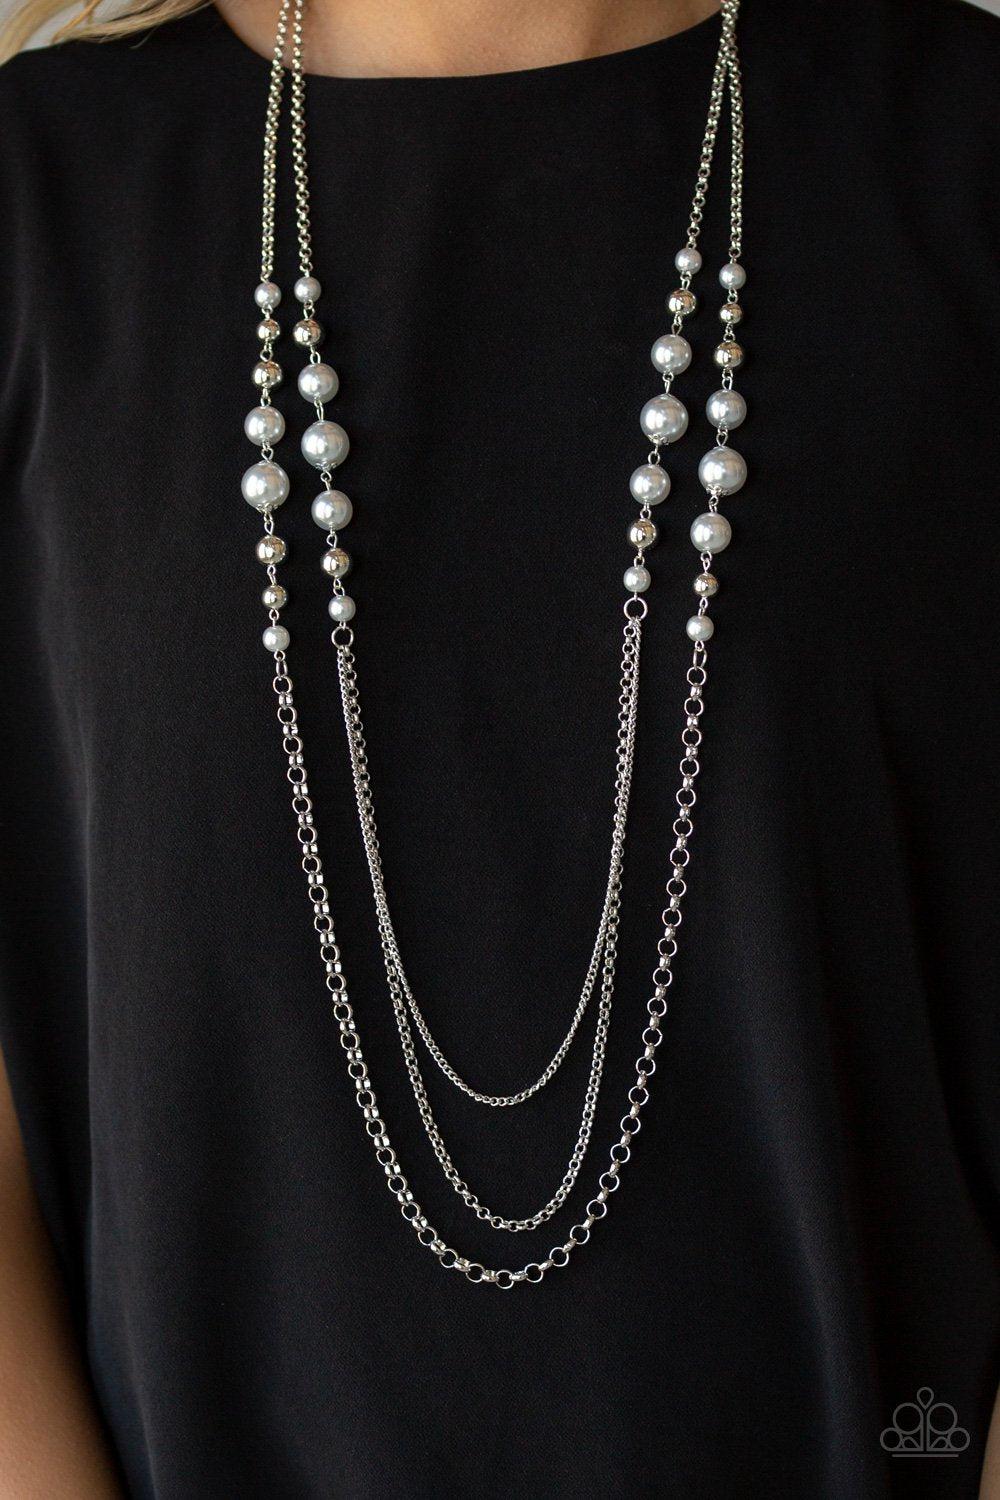 Charmingly Colorful Silver Pearl Necklace - Paparazzi Accessories - lightbox -CarasShop.com - $5 Jewelry by Cara Jewels